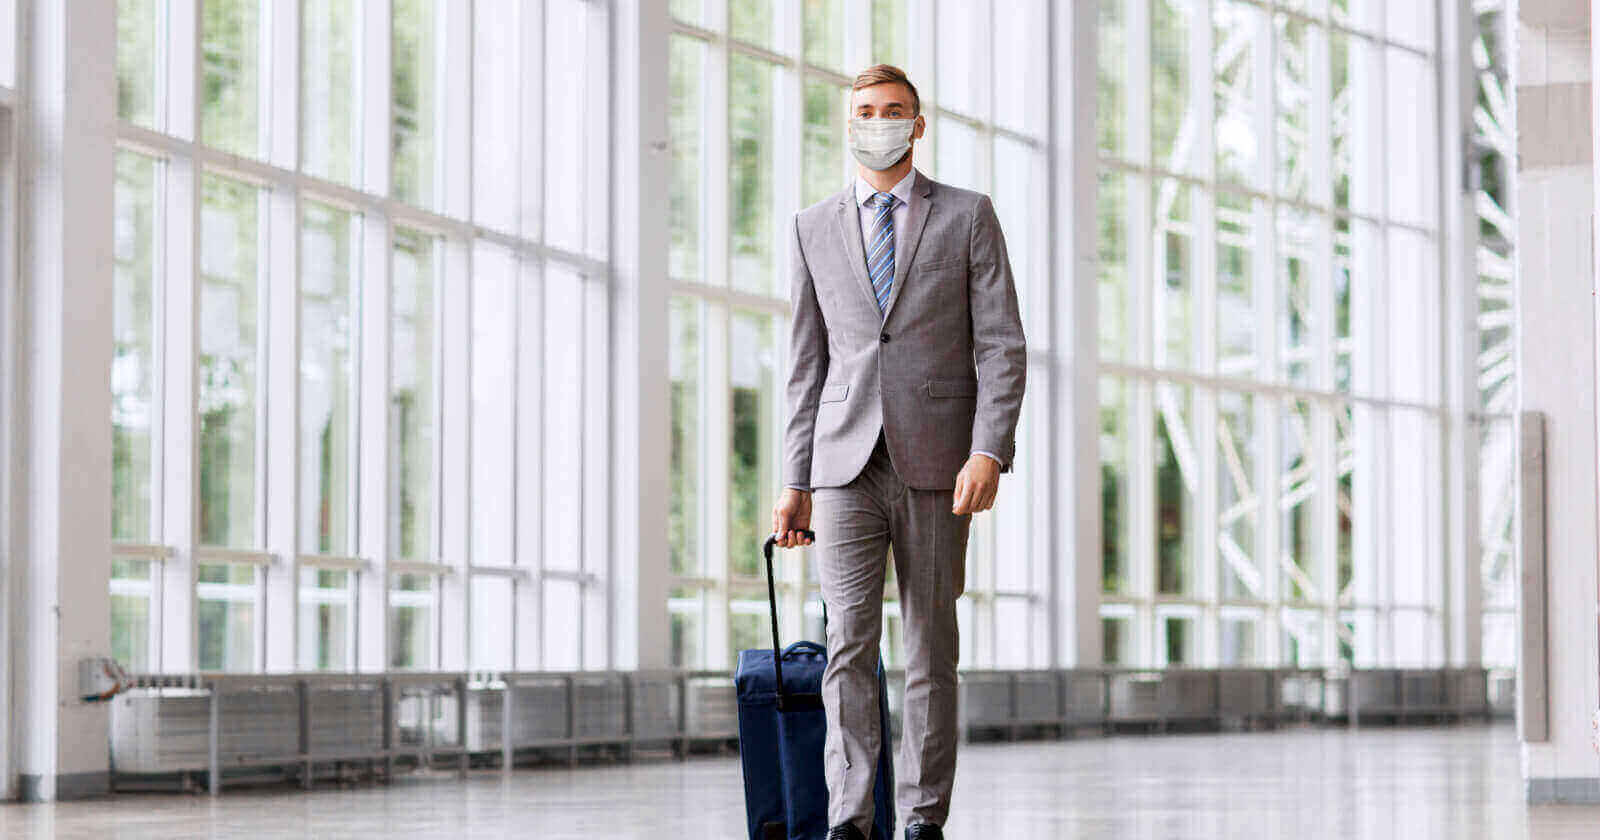 10 Essential Corporate Travel Safety and Security Measures for Your Employees